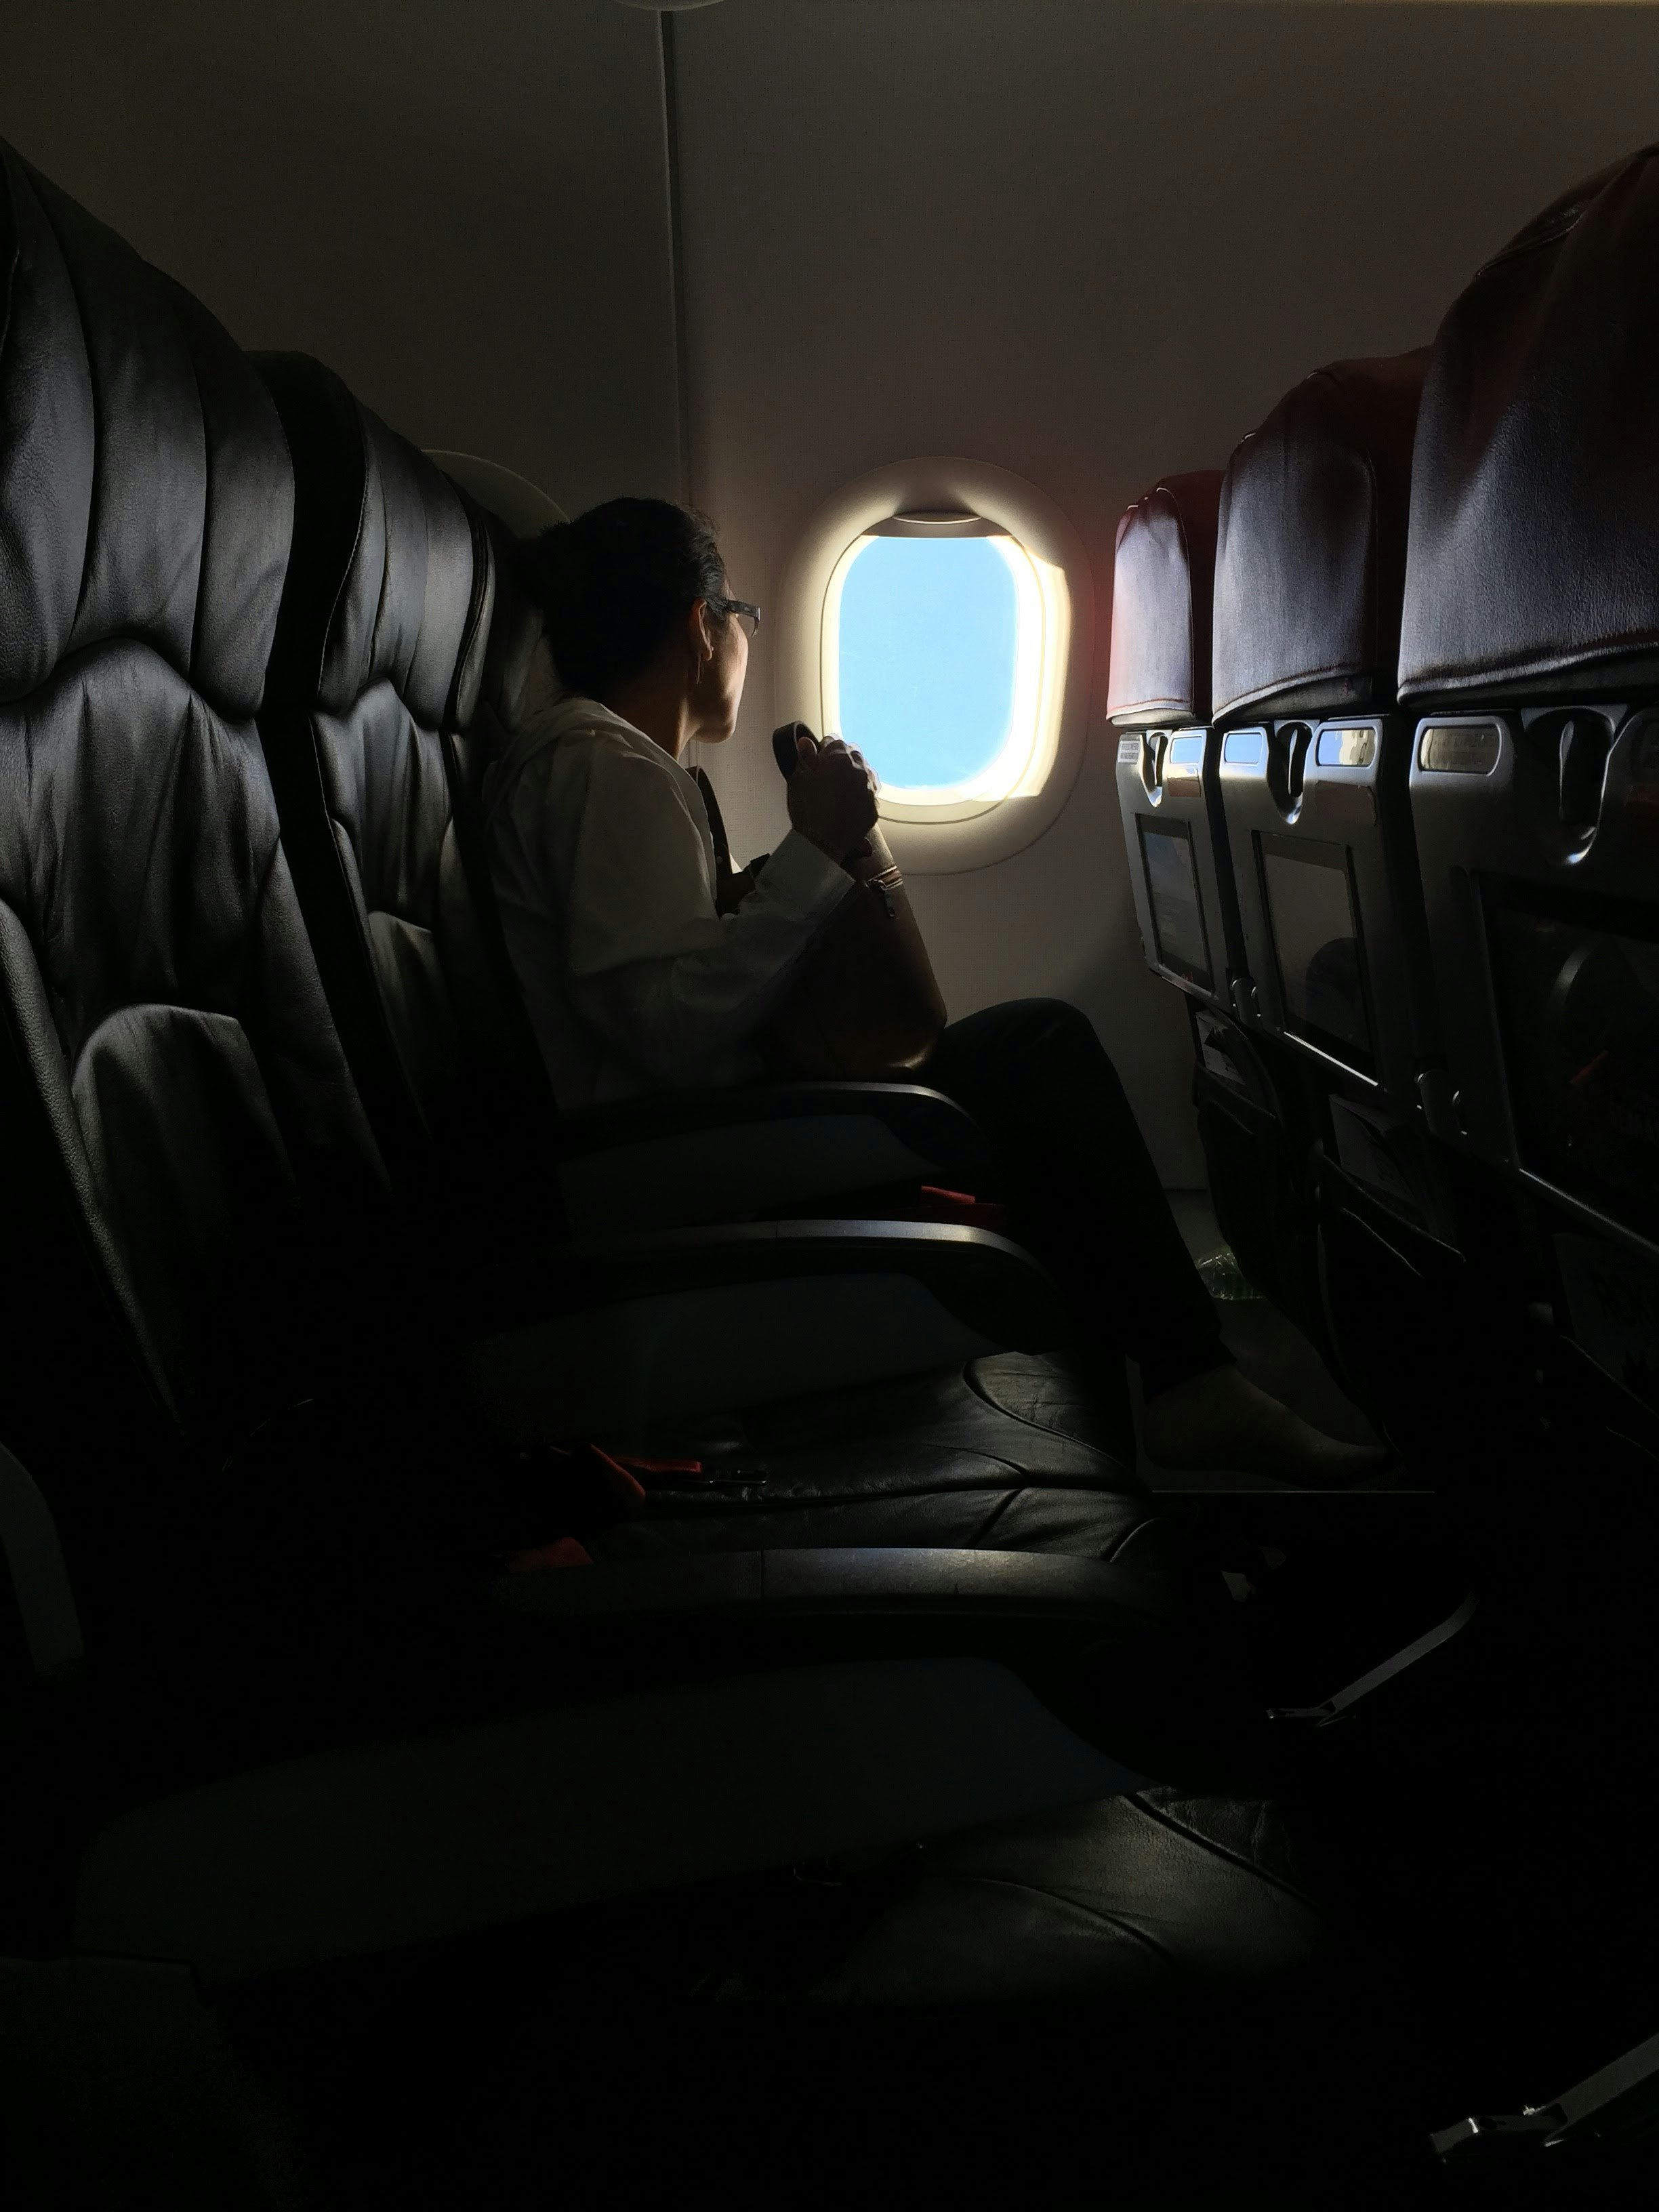 I was on my way to Jakarta from Kuala Lumpur, and this picture is captured when the flight is almost reached the metropolis city. This woman was sitting alone and the natural lighting that went into flight made me quickly grab my phone to snap this. I love natural lighting cause it will always create beautiful moments.